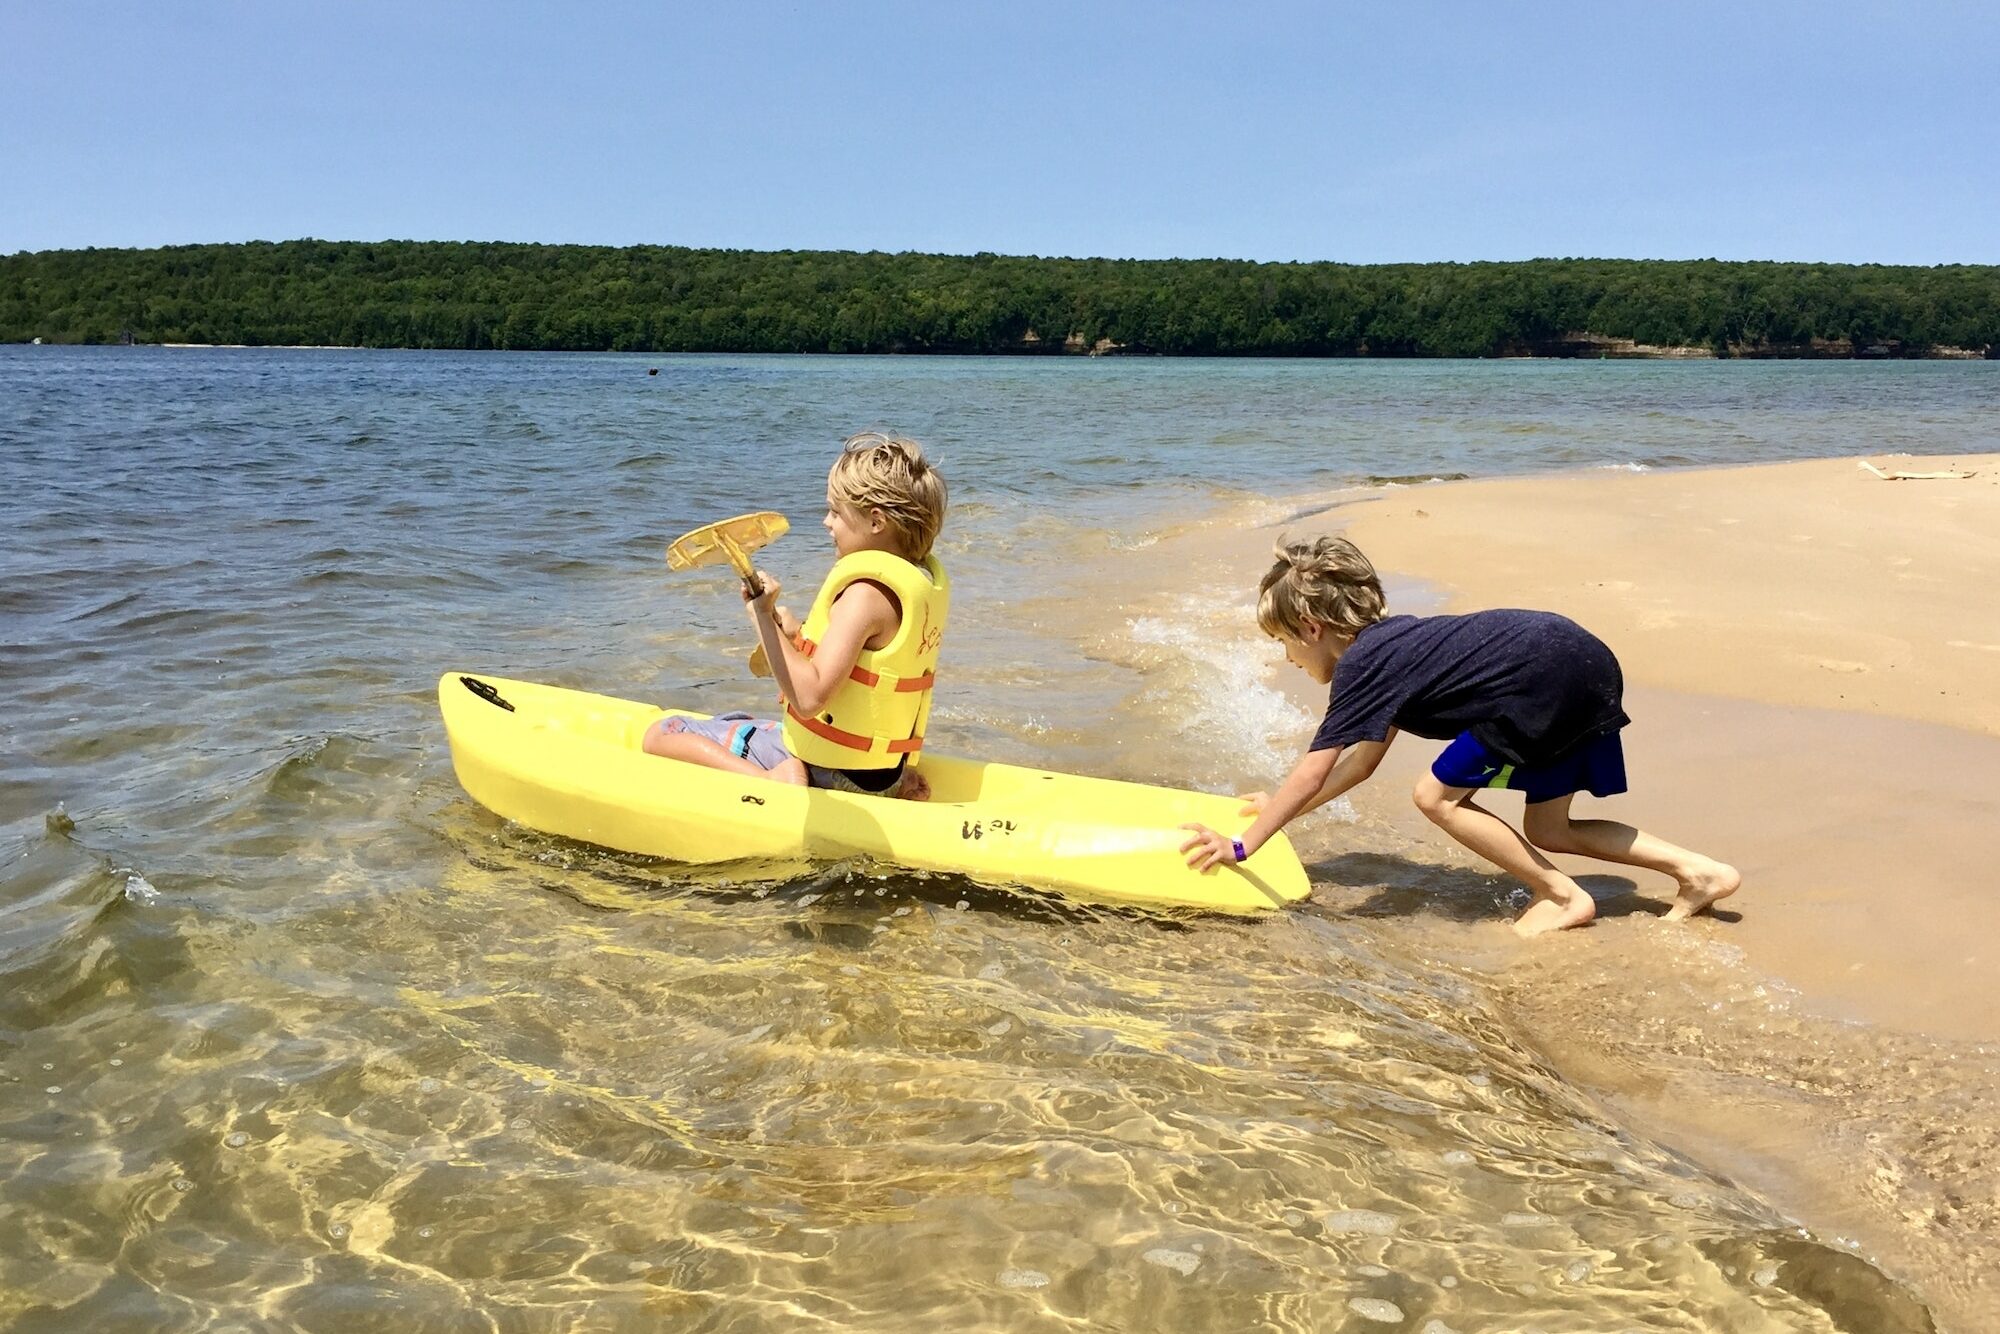 Lake Superior Kayaking - sibling helps out and gives the kayak a push into water